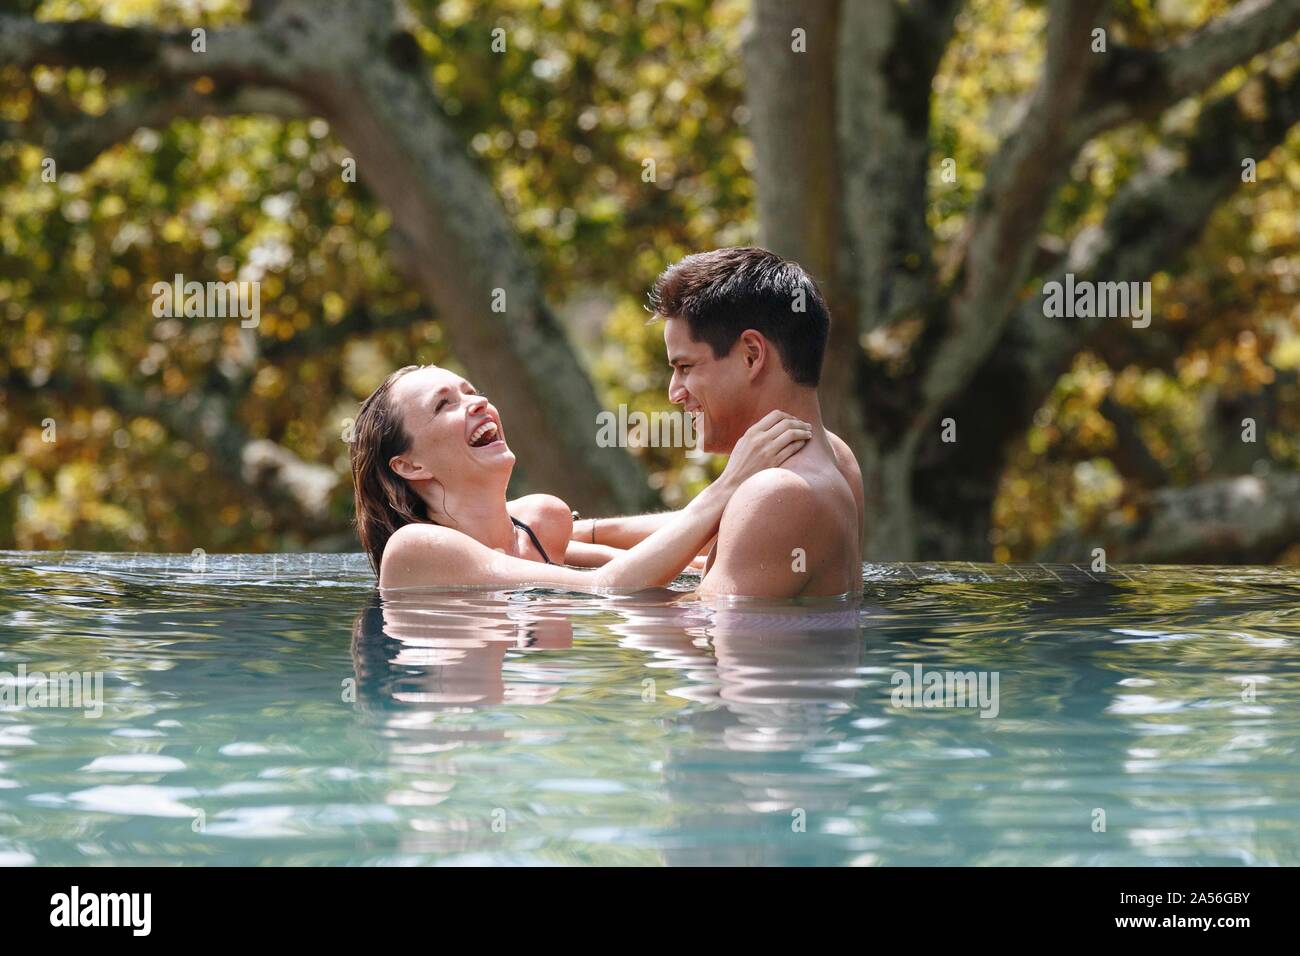 Couple laughing in swimming pool Stock Photo